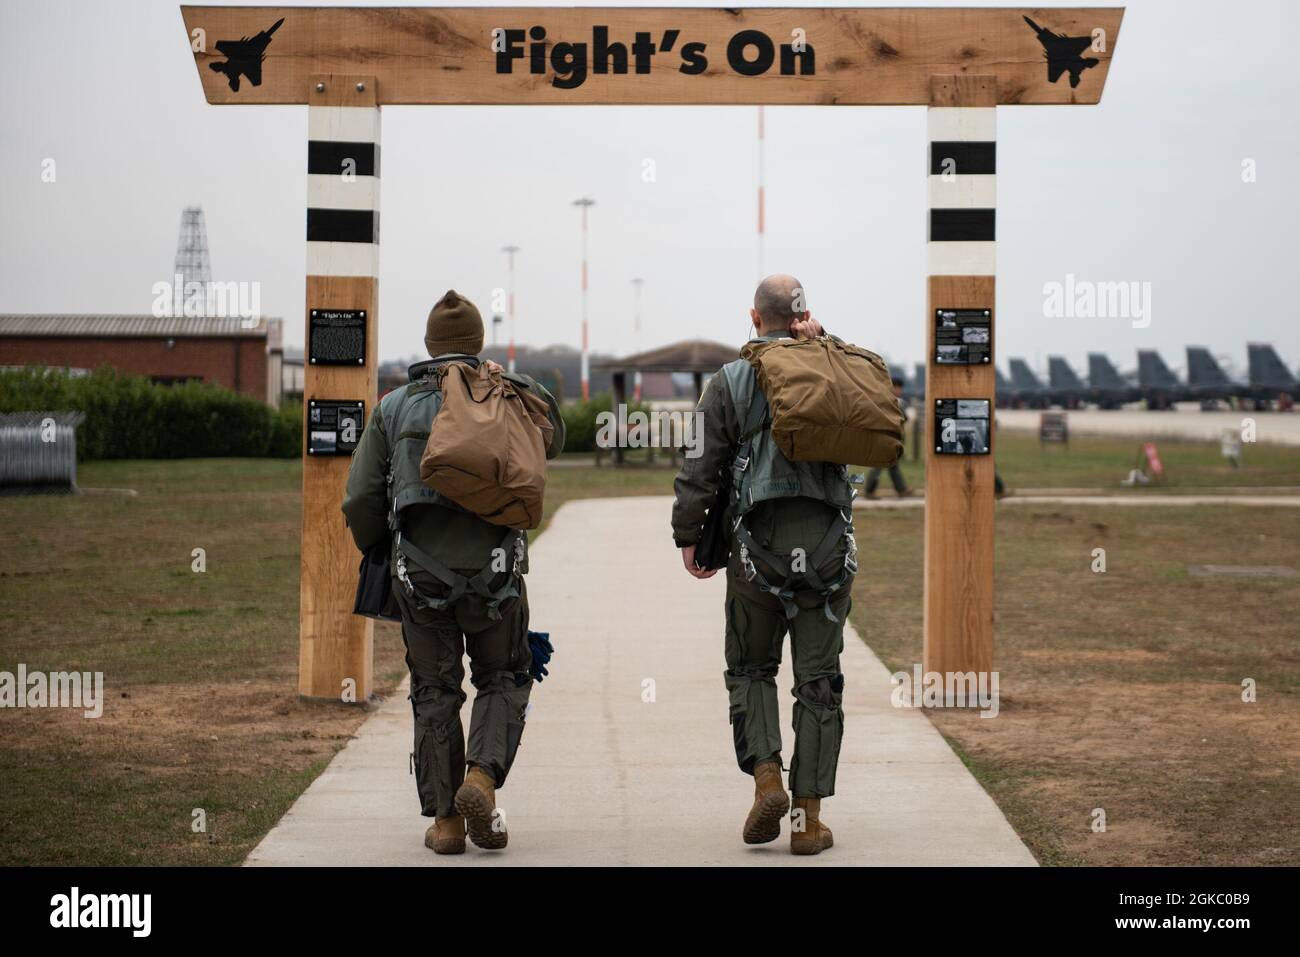 Aircrew assigned to the 494th Fighter Squadron step through the NEW heritage arch on their way to their aircraft at Royal Air Force Lakenheath, England, March 8, 2021. Liberty Wing aircrew and Airmen will walk under this arch on their way to carry out the 48th Fighter Wing mission for years to come. Stock Photo